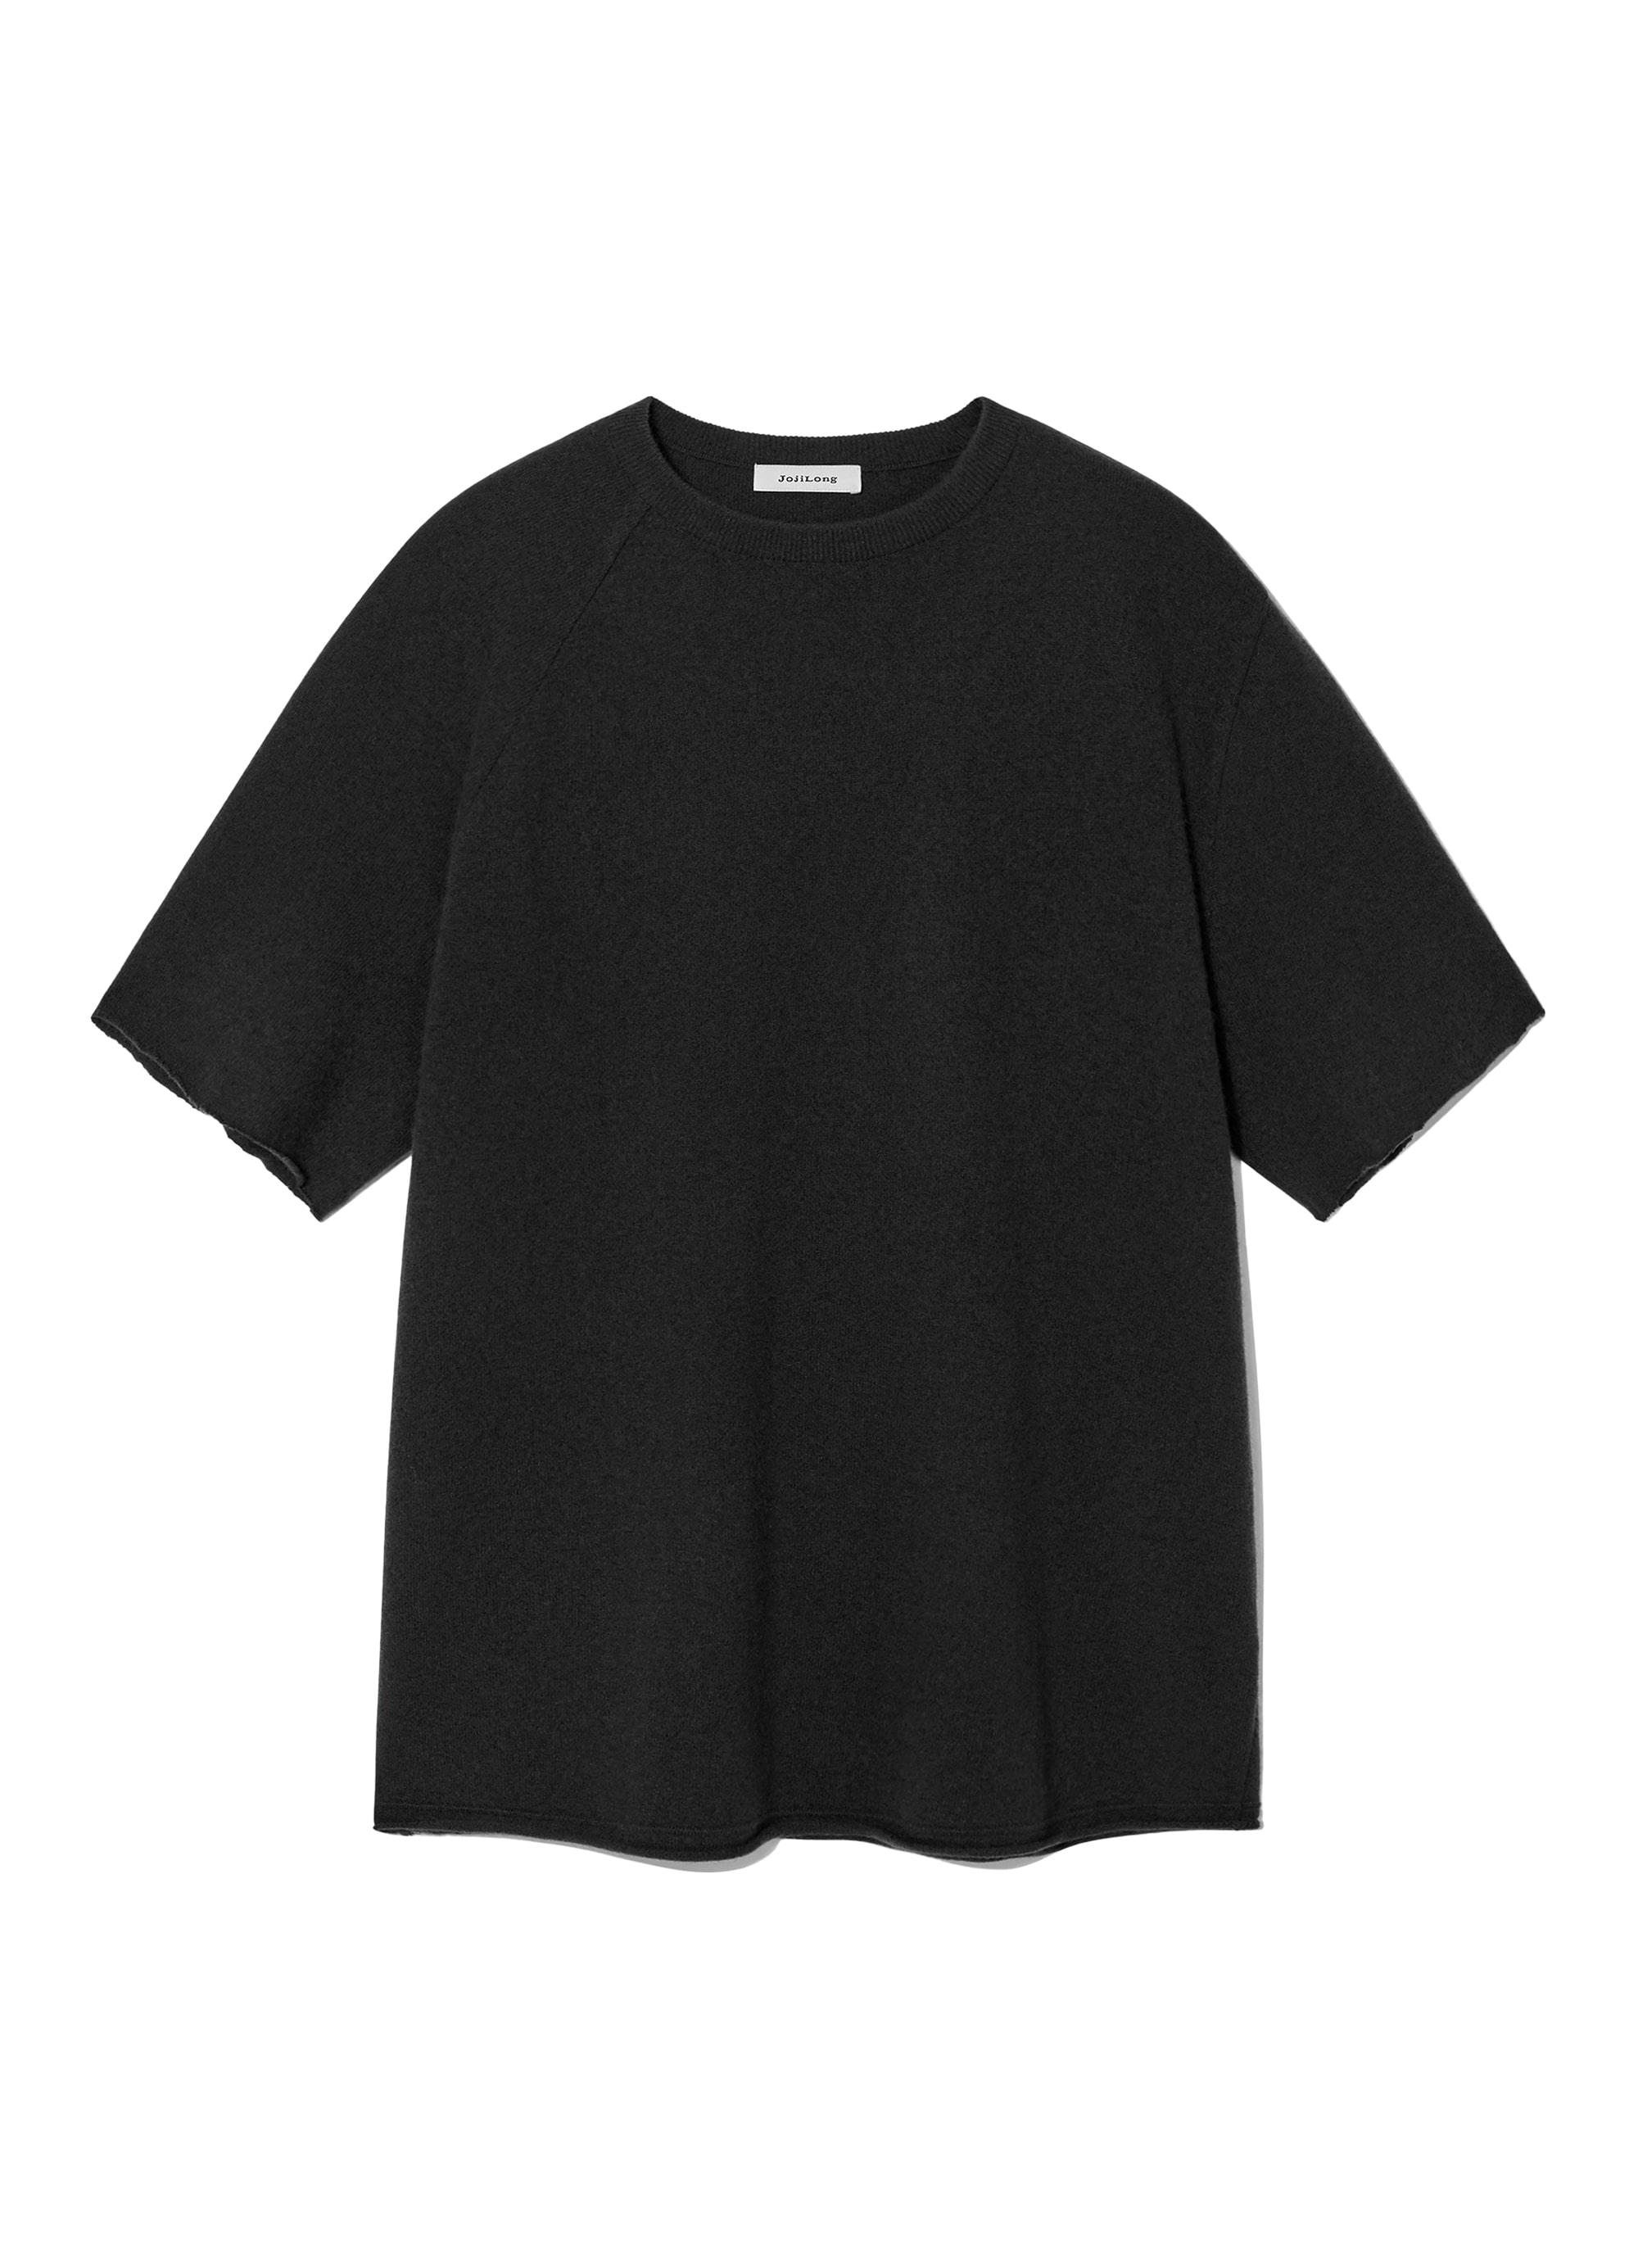 CASHMERE DISTRESSED SLEEVE KNIT BLACK